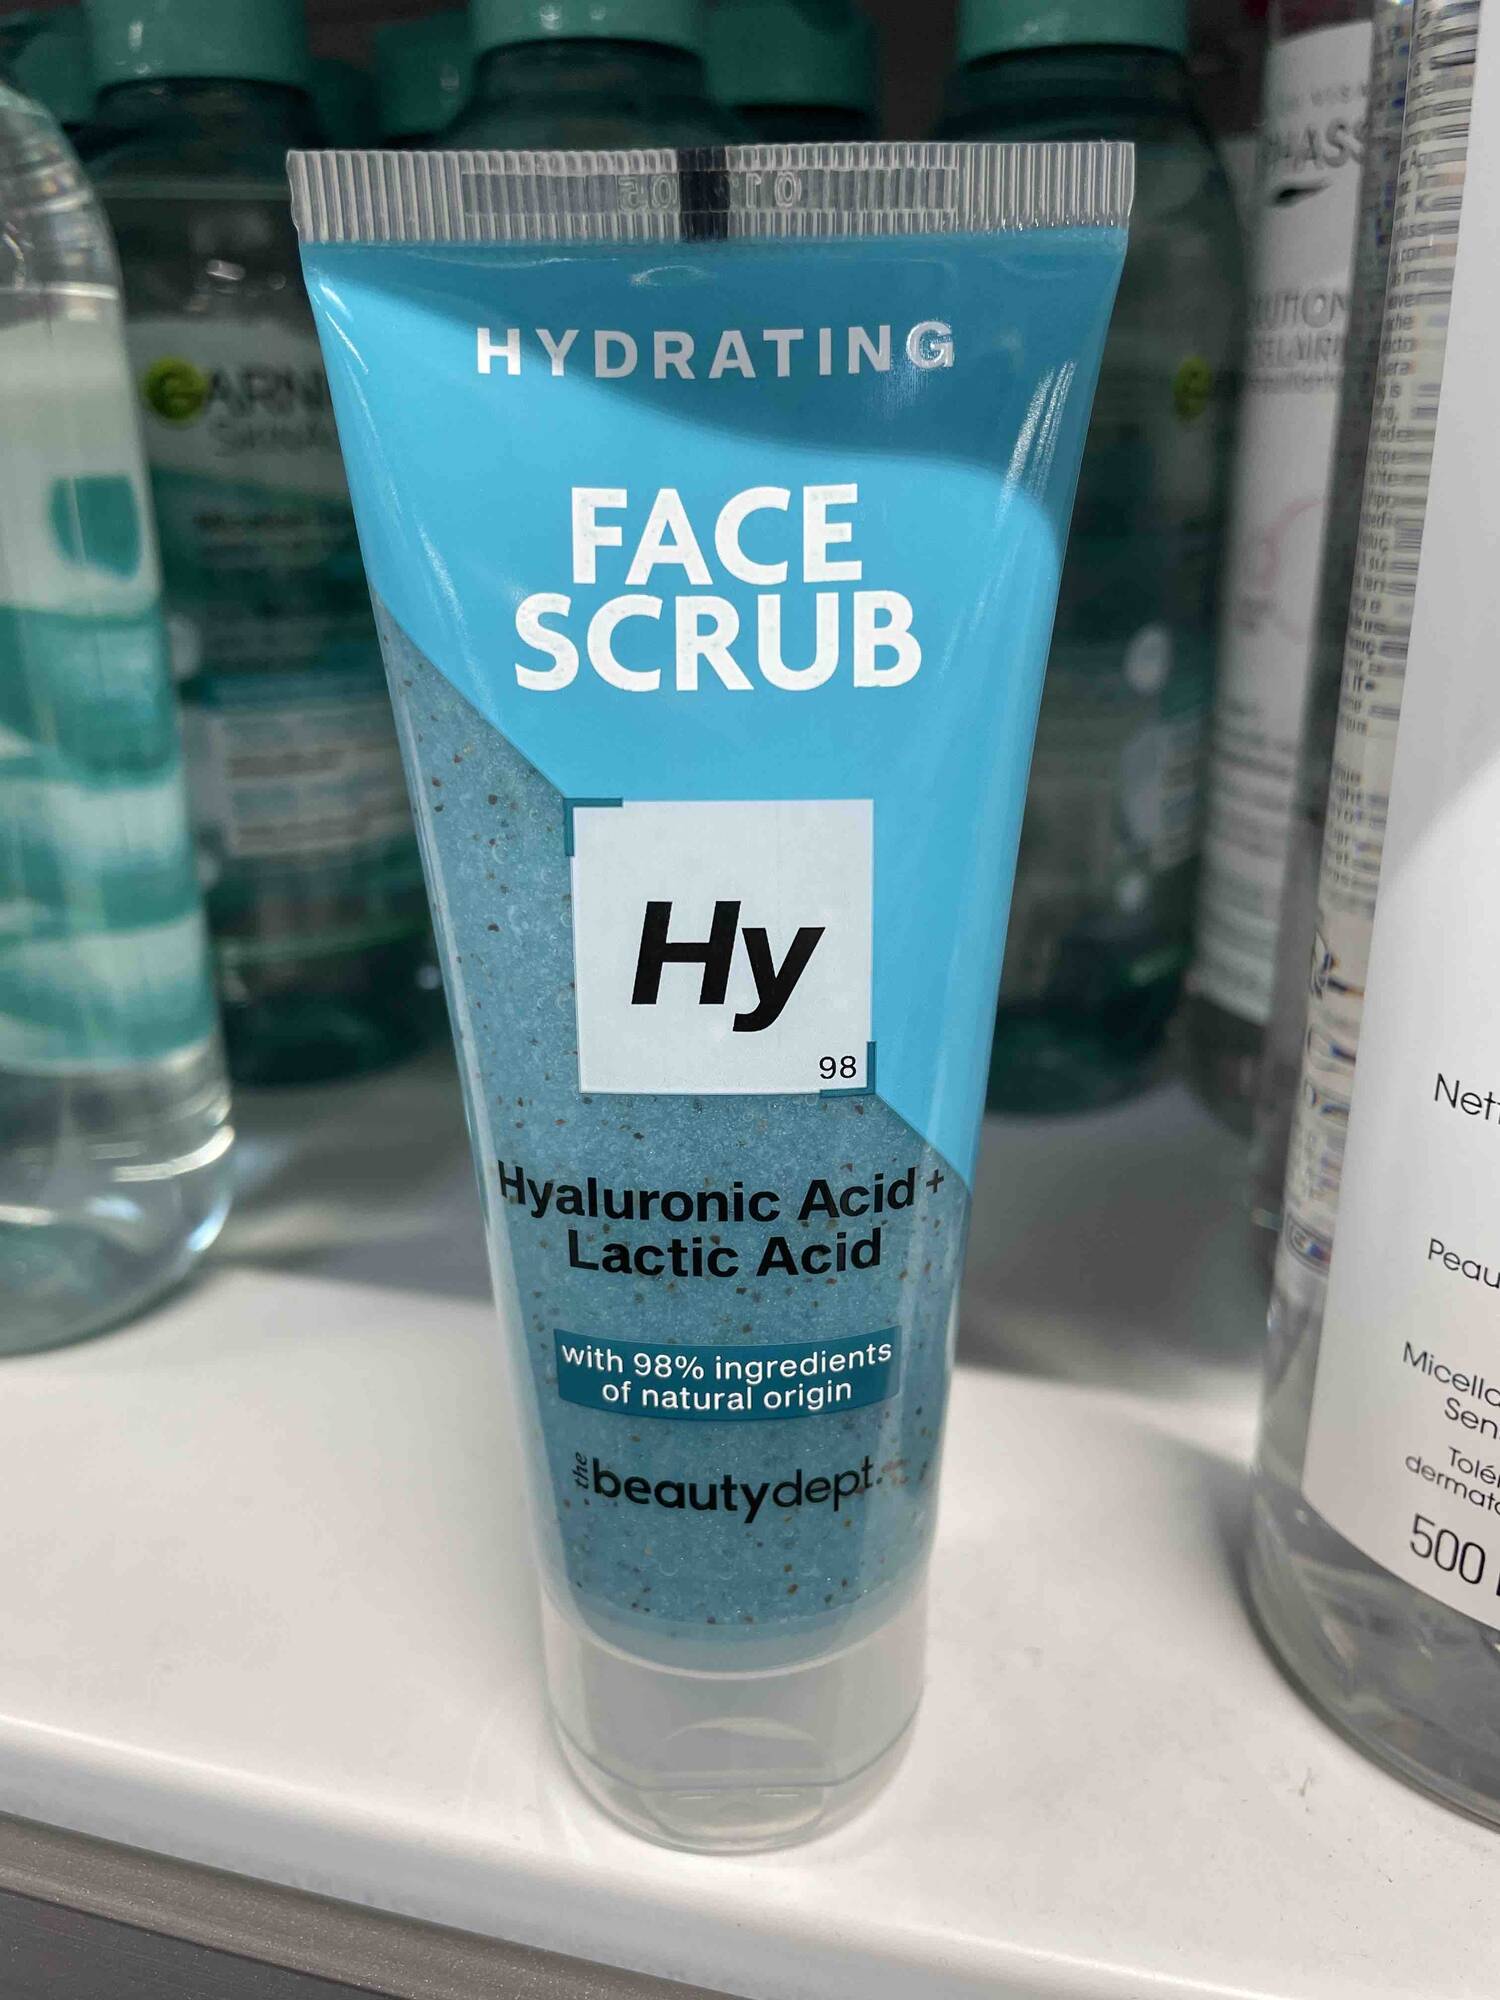 THE BEAUTY DEPT - Hy 98 - Face scrub